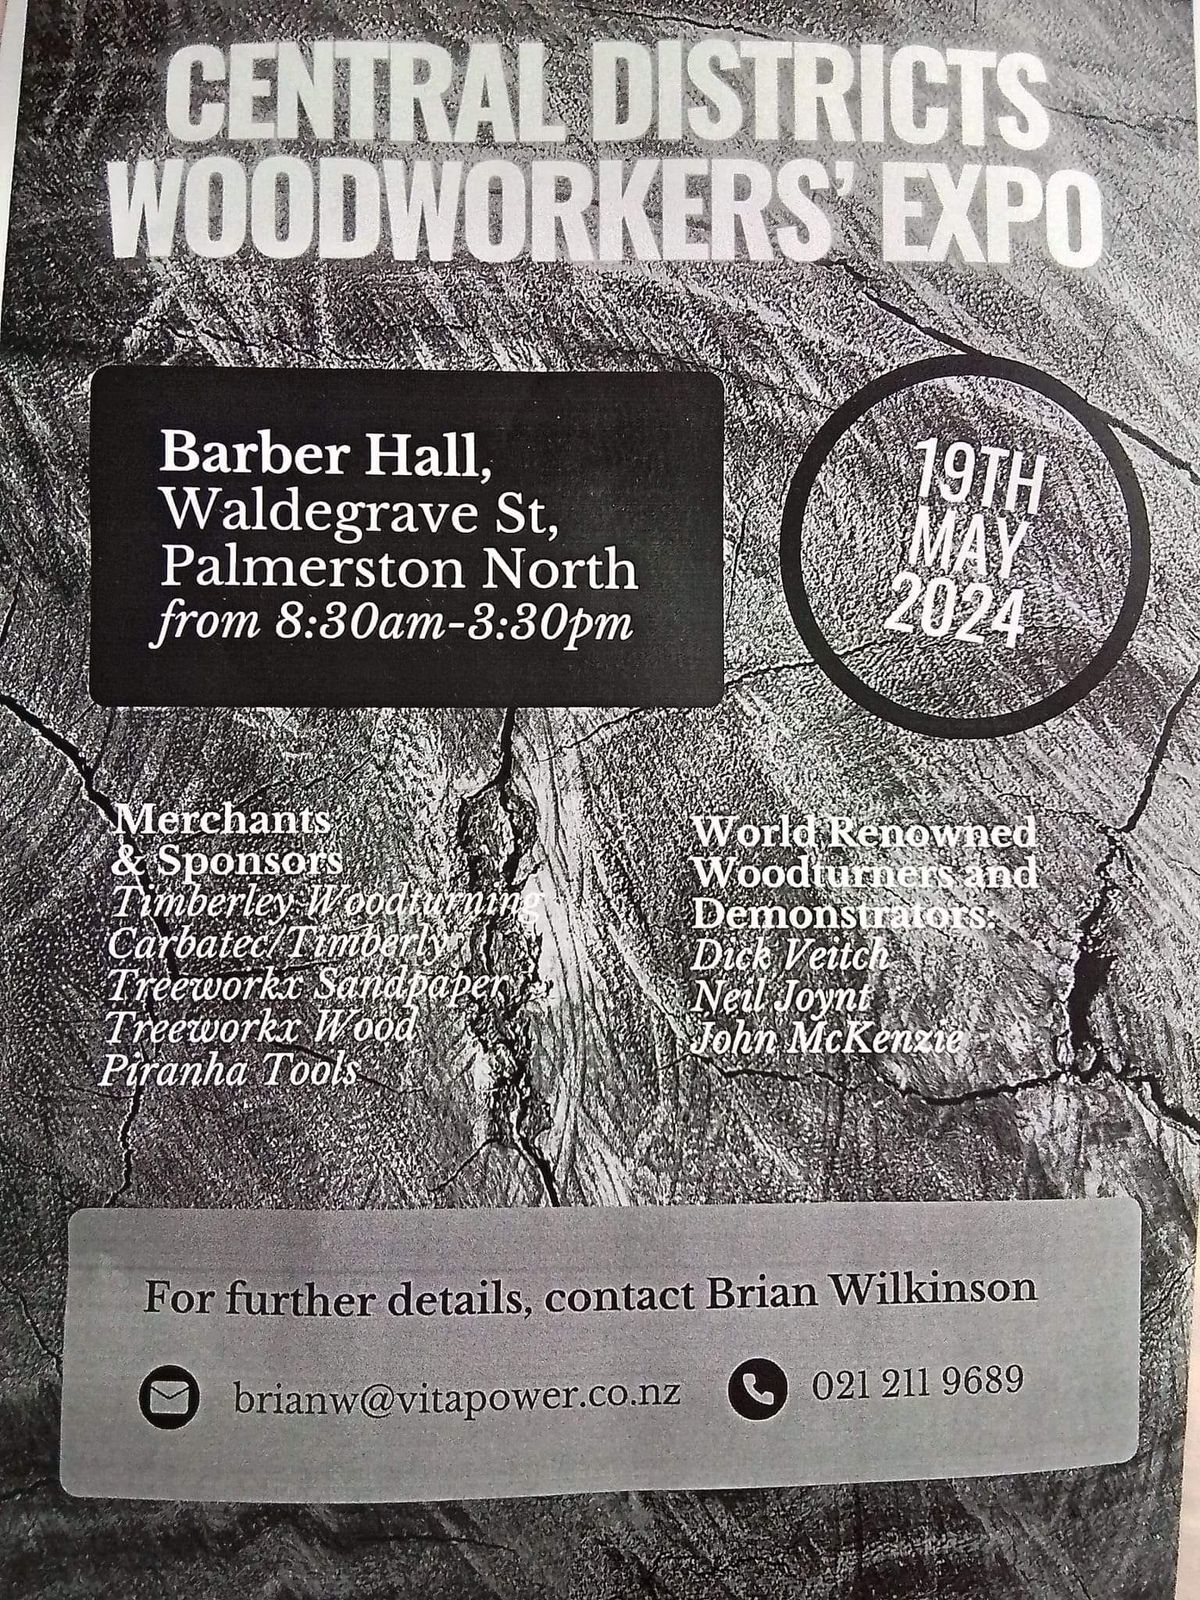 Central Districts Woodworkers Expo